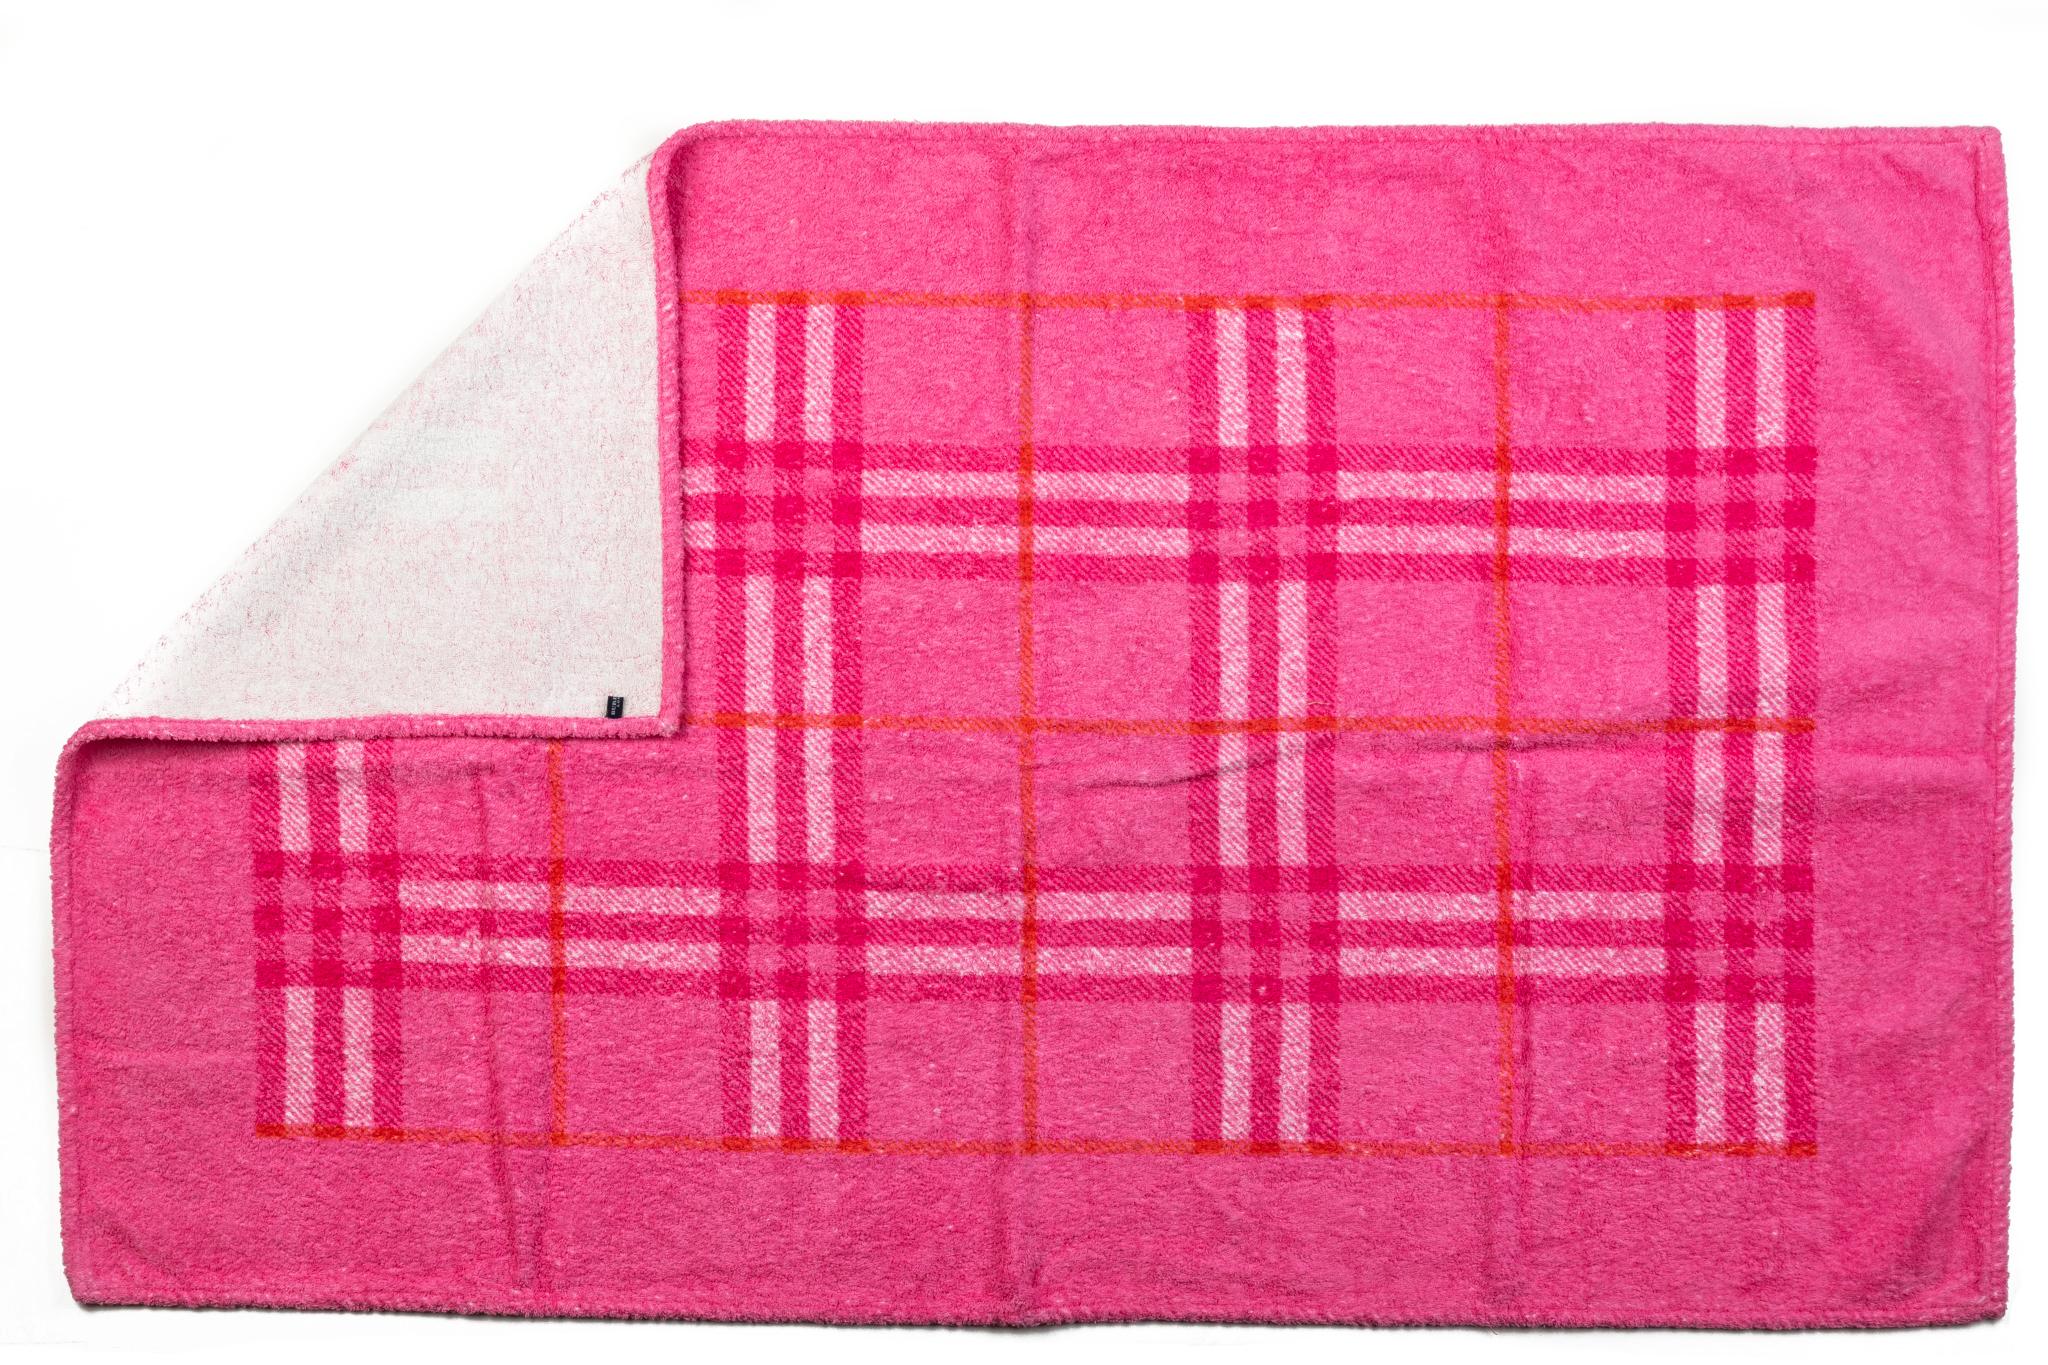 Burberry brand new 100% cotton beach towel in fuchsia checkered pattern. Care tag attached.